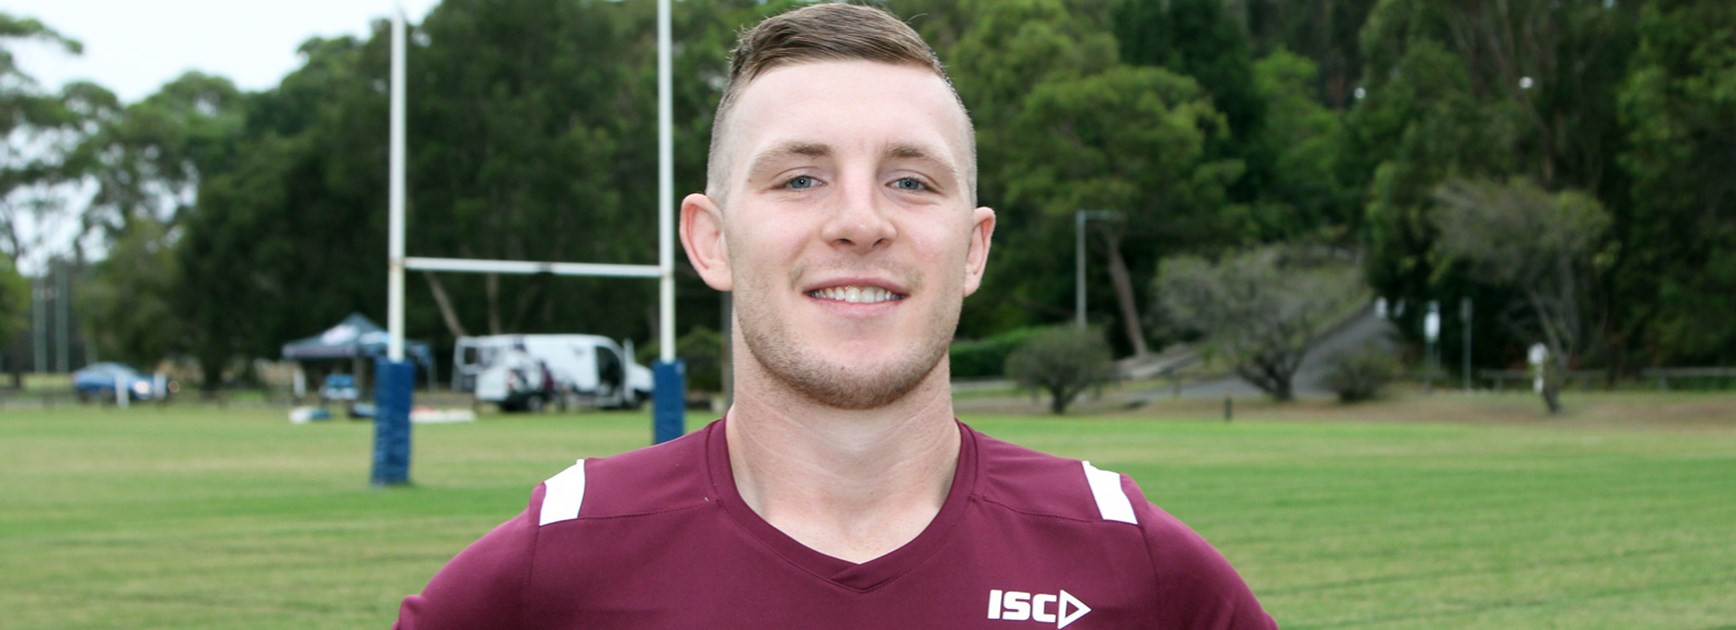 Sea Eagles recruit Jackson Hastings is enjoying life on the northern beaches.